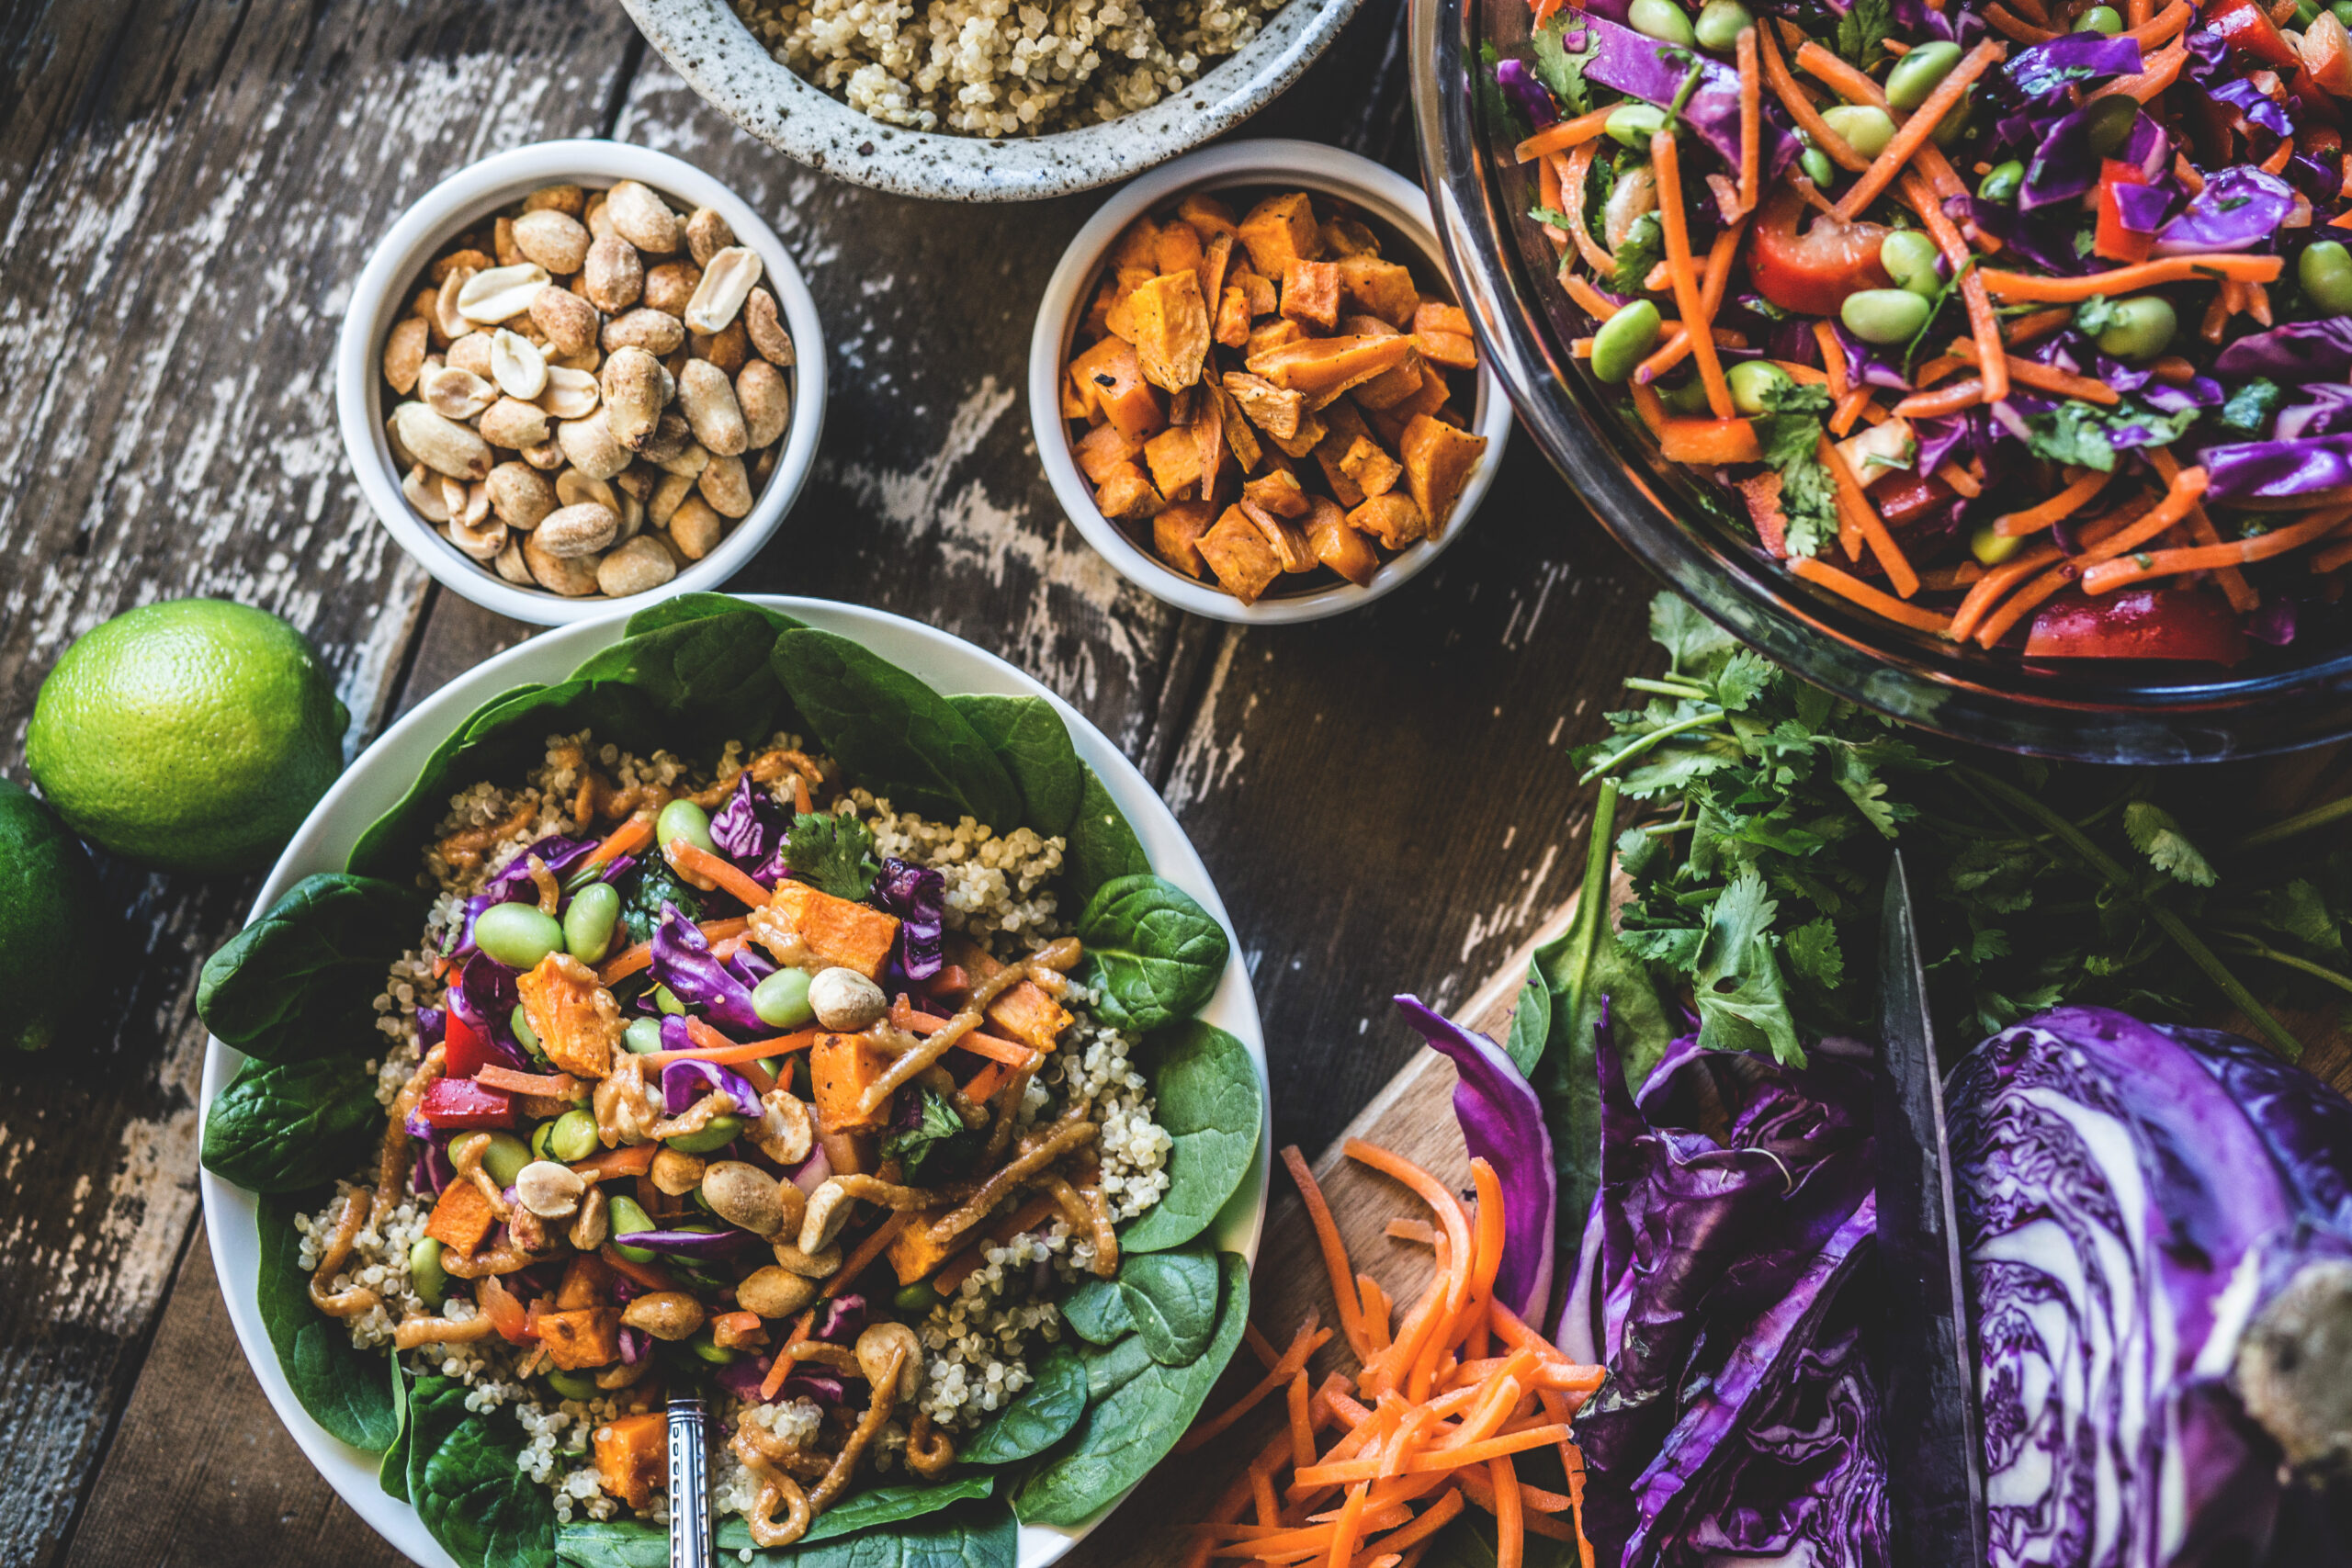 20 Tips to Make Shifting to a Plant-based Lifestyle Easier: